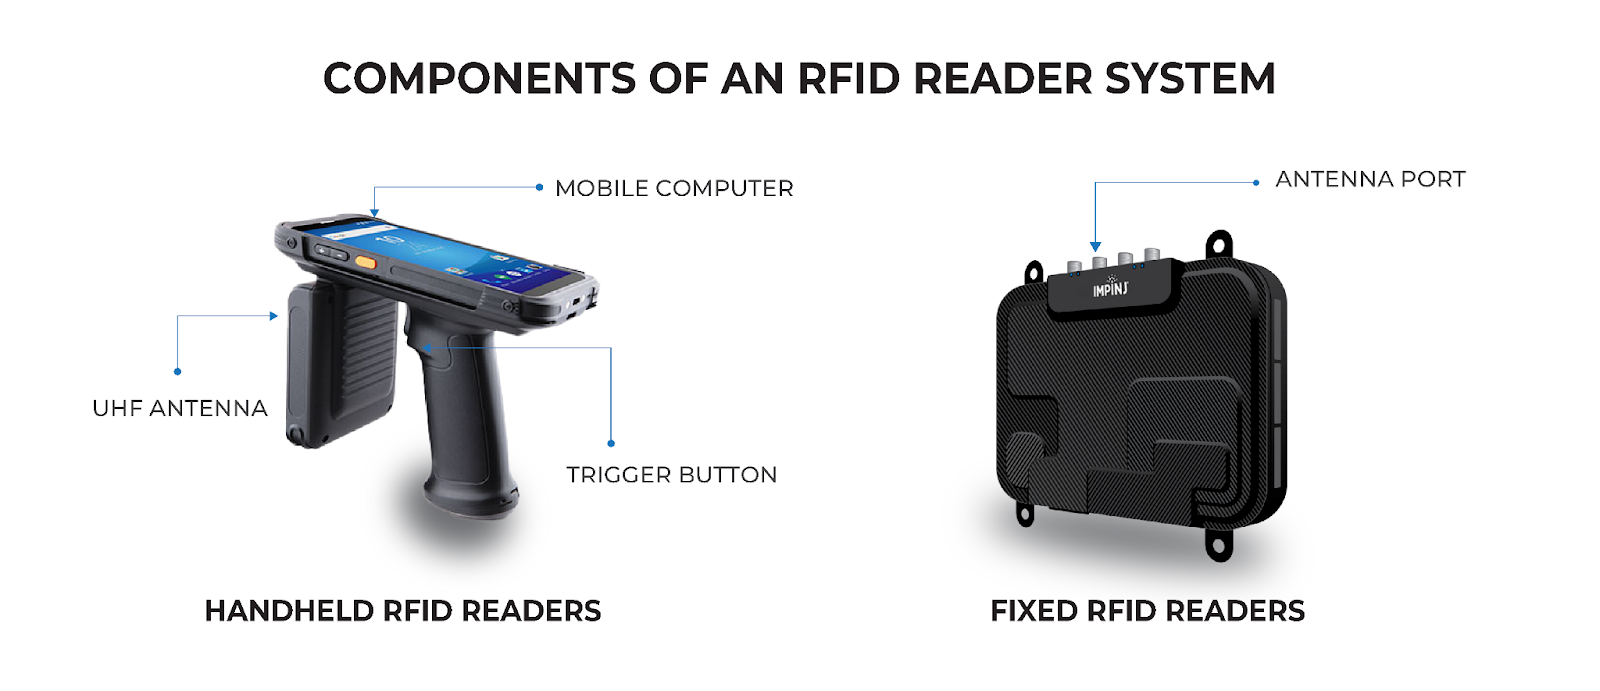 Components of an RFID Reader System in Handheld and Fixed Readers